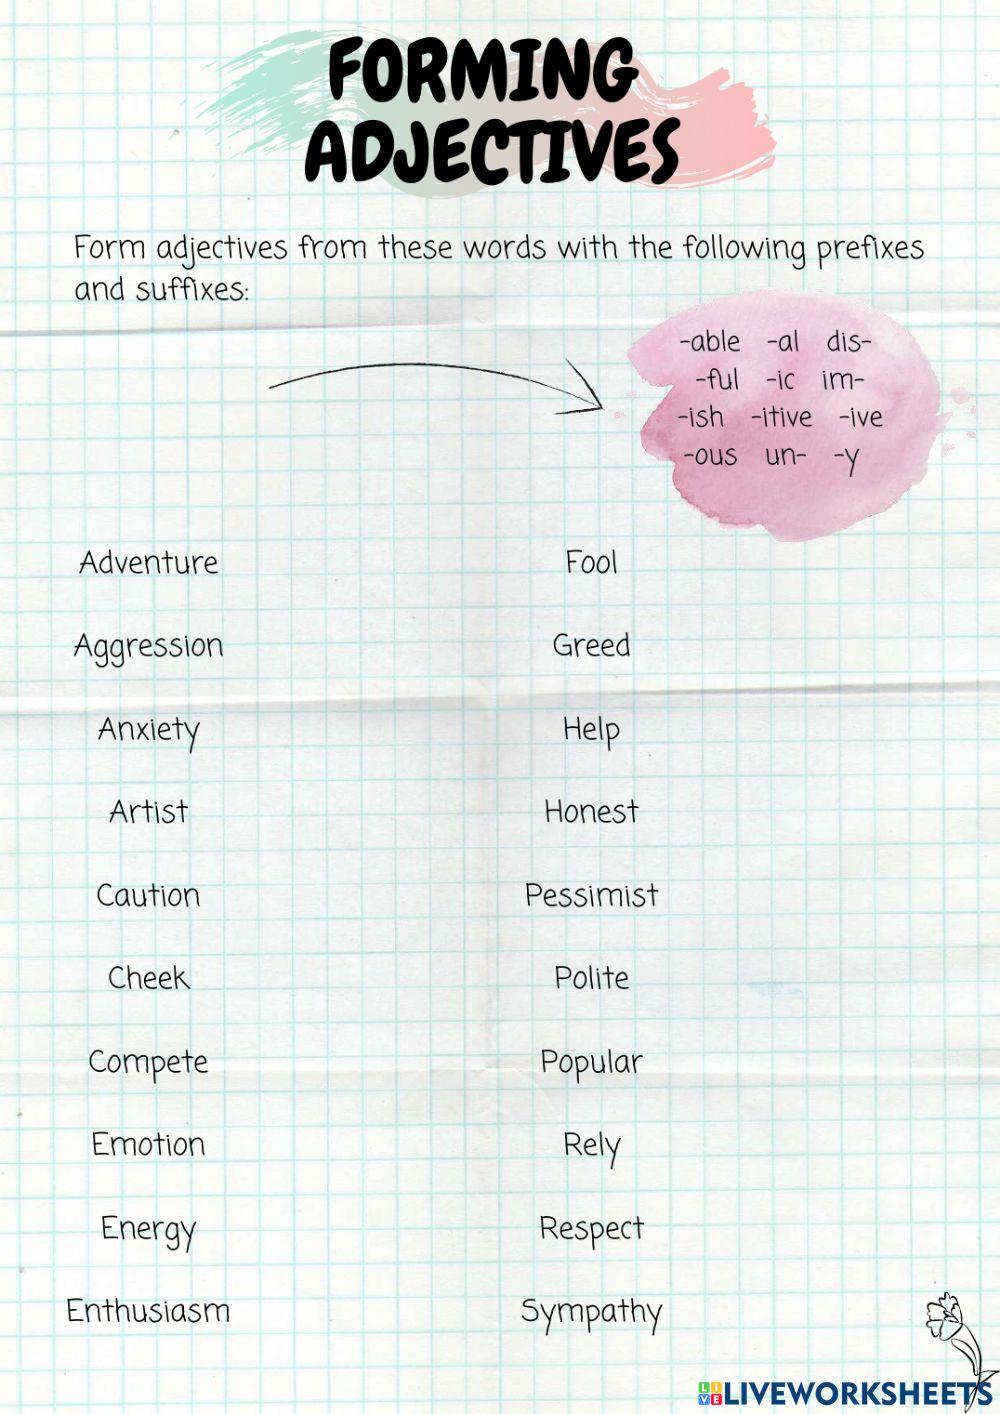 Forming adjectives